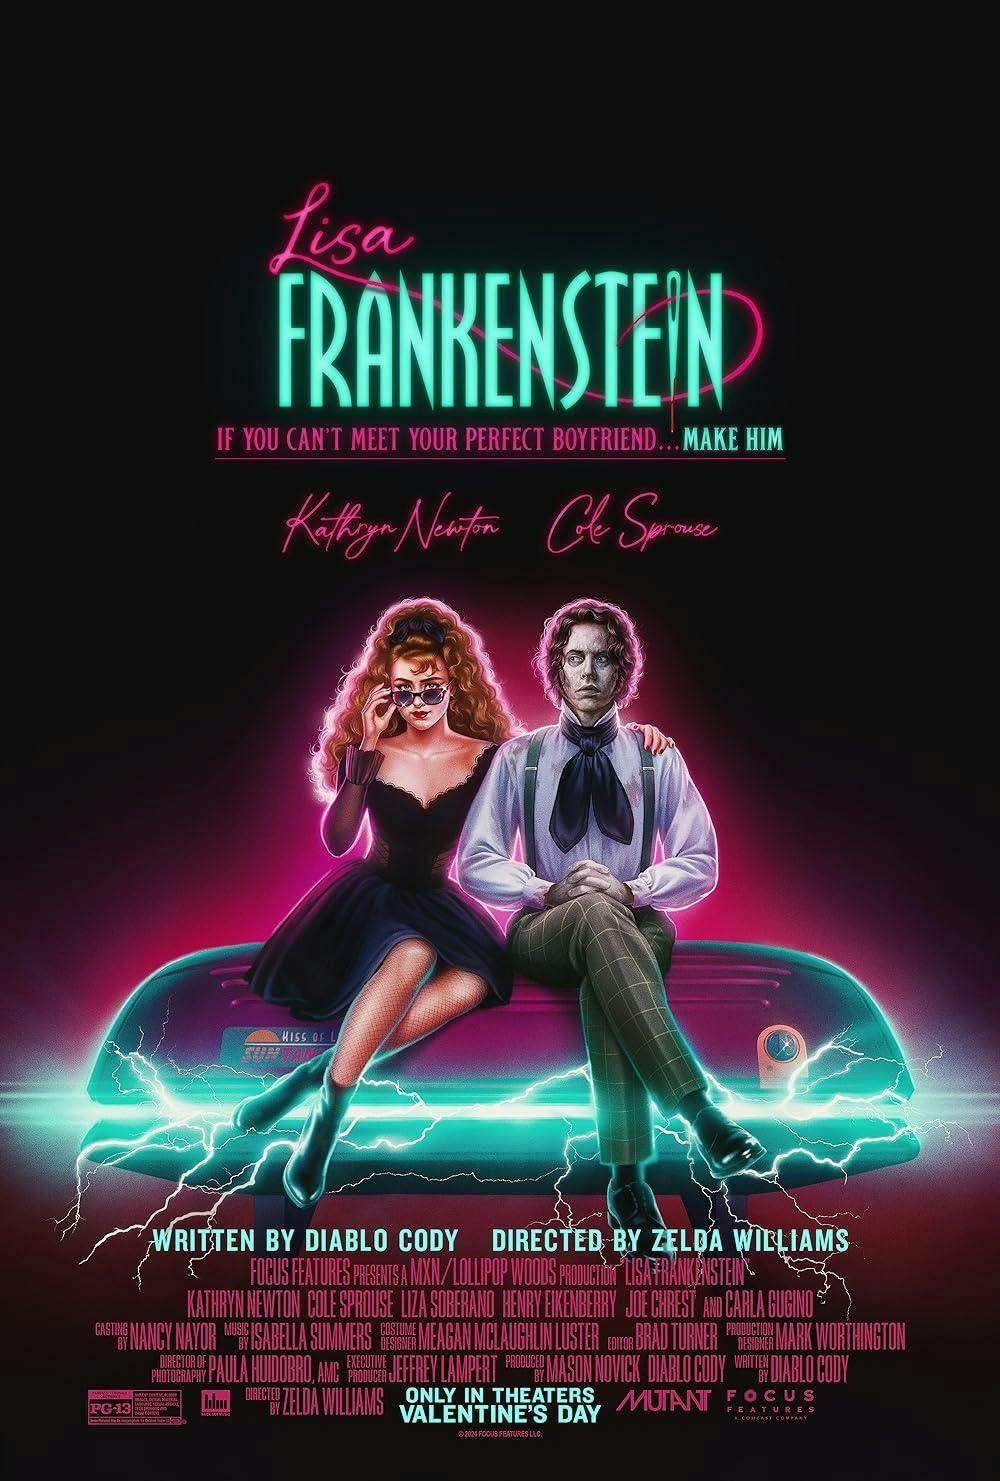 Review: "Lisa Frankenstein" is a quirky, cute flick